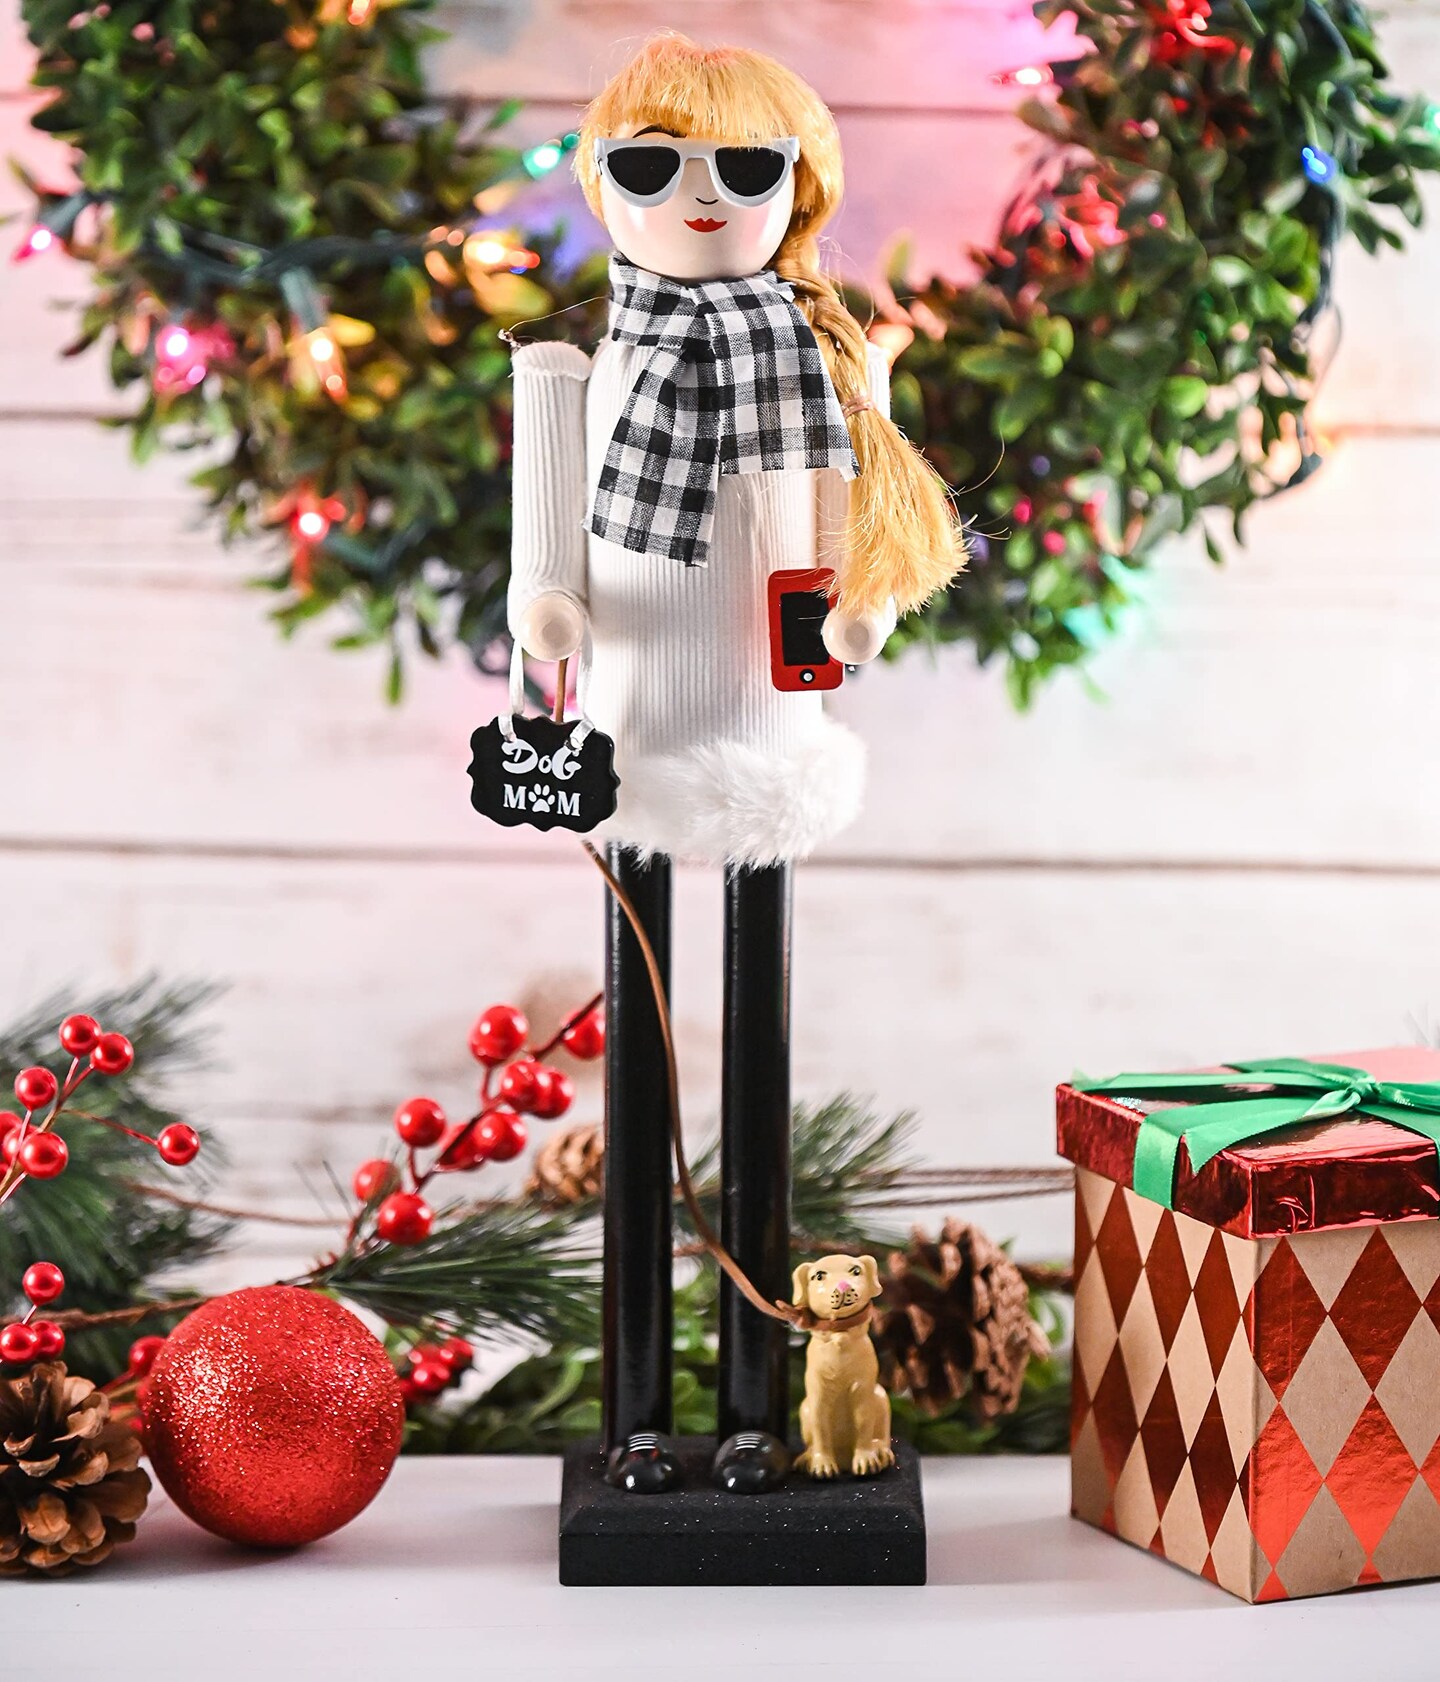 Ornativity Christmas Dog Mom Nutcracker &#x2013; White and Black Wooden Nutcracker Woman with Dog on Leash and a Smartphone in Hand Xmas Themed Holiday Nut Cracker Doll Figure Decorations